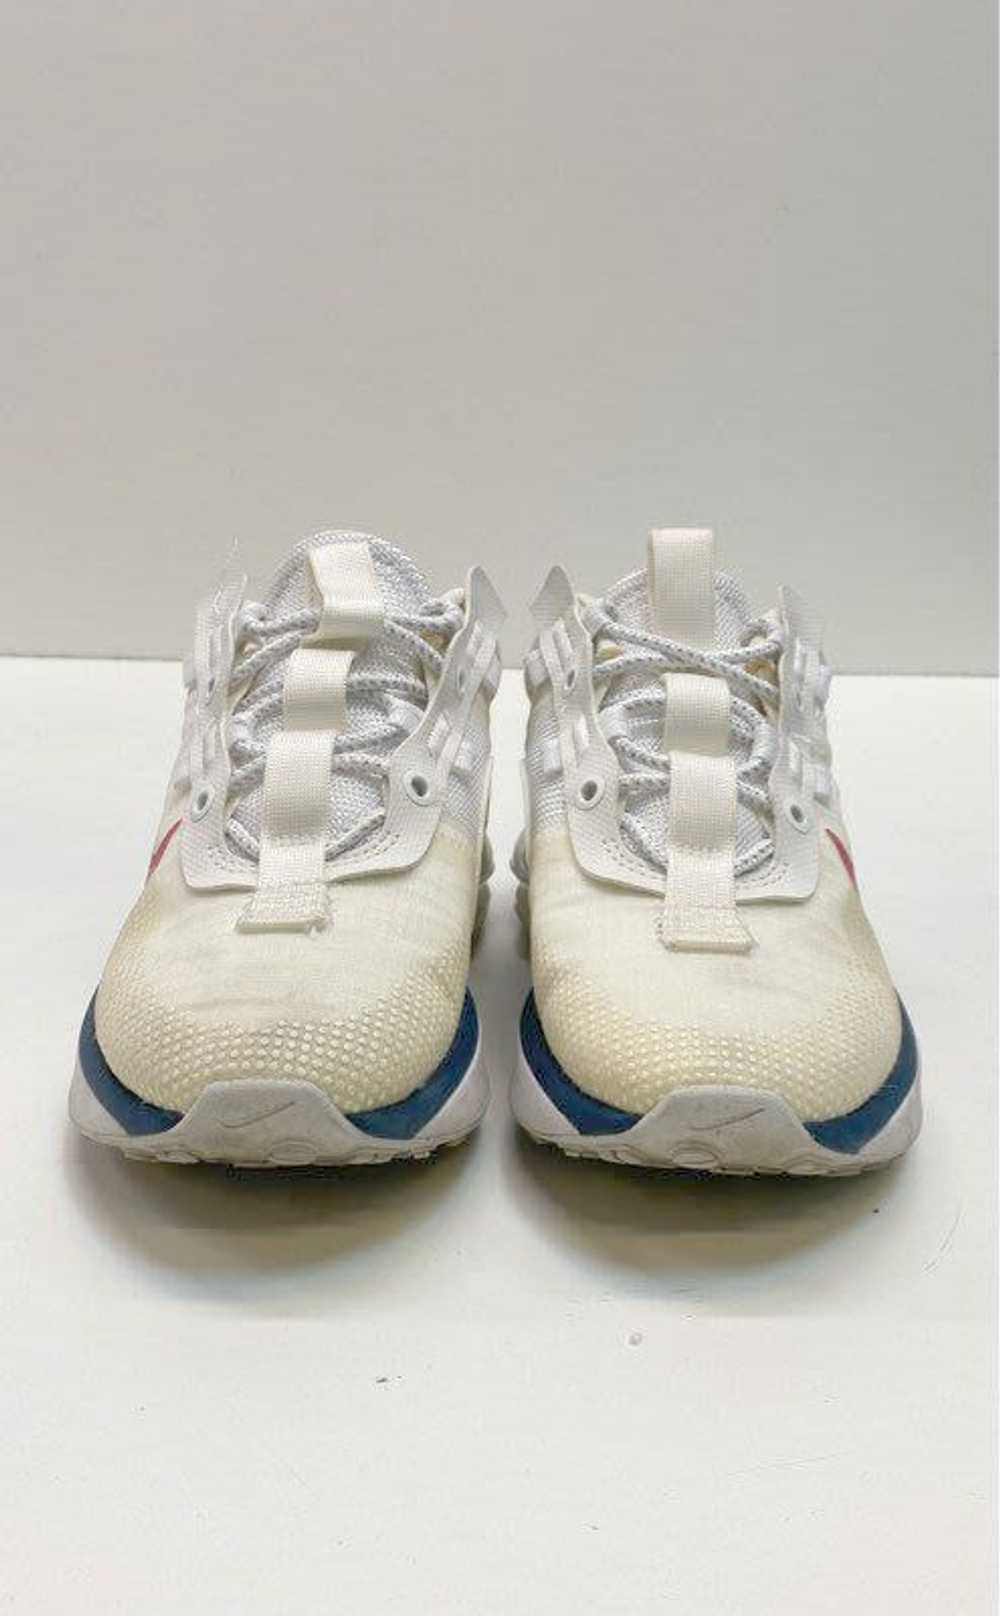 Nike Air Max Sneakers White Gypsy Rose 6.5 - image 3